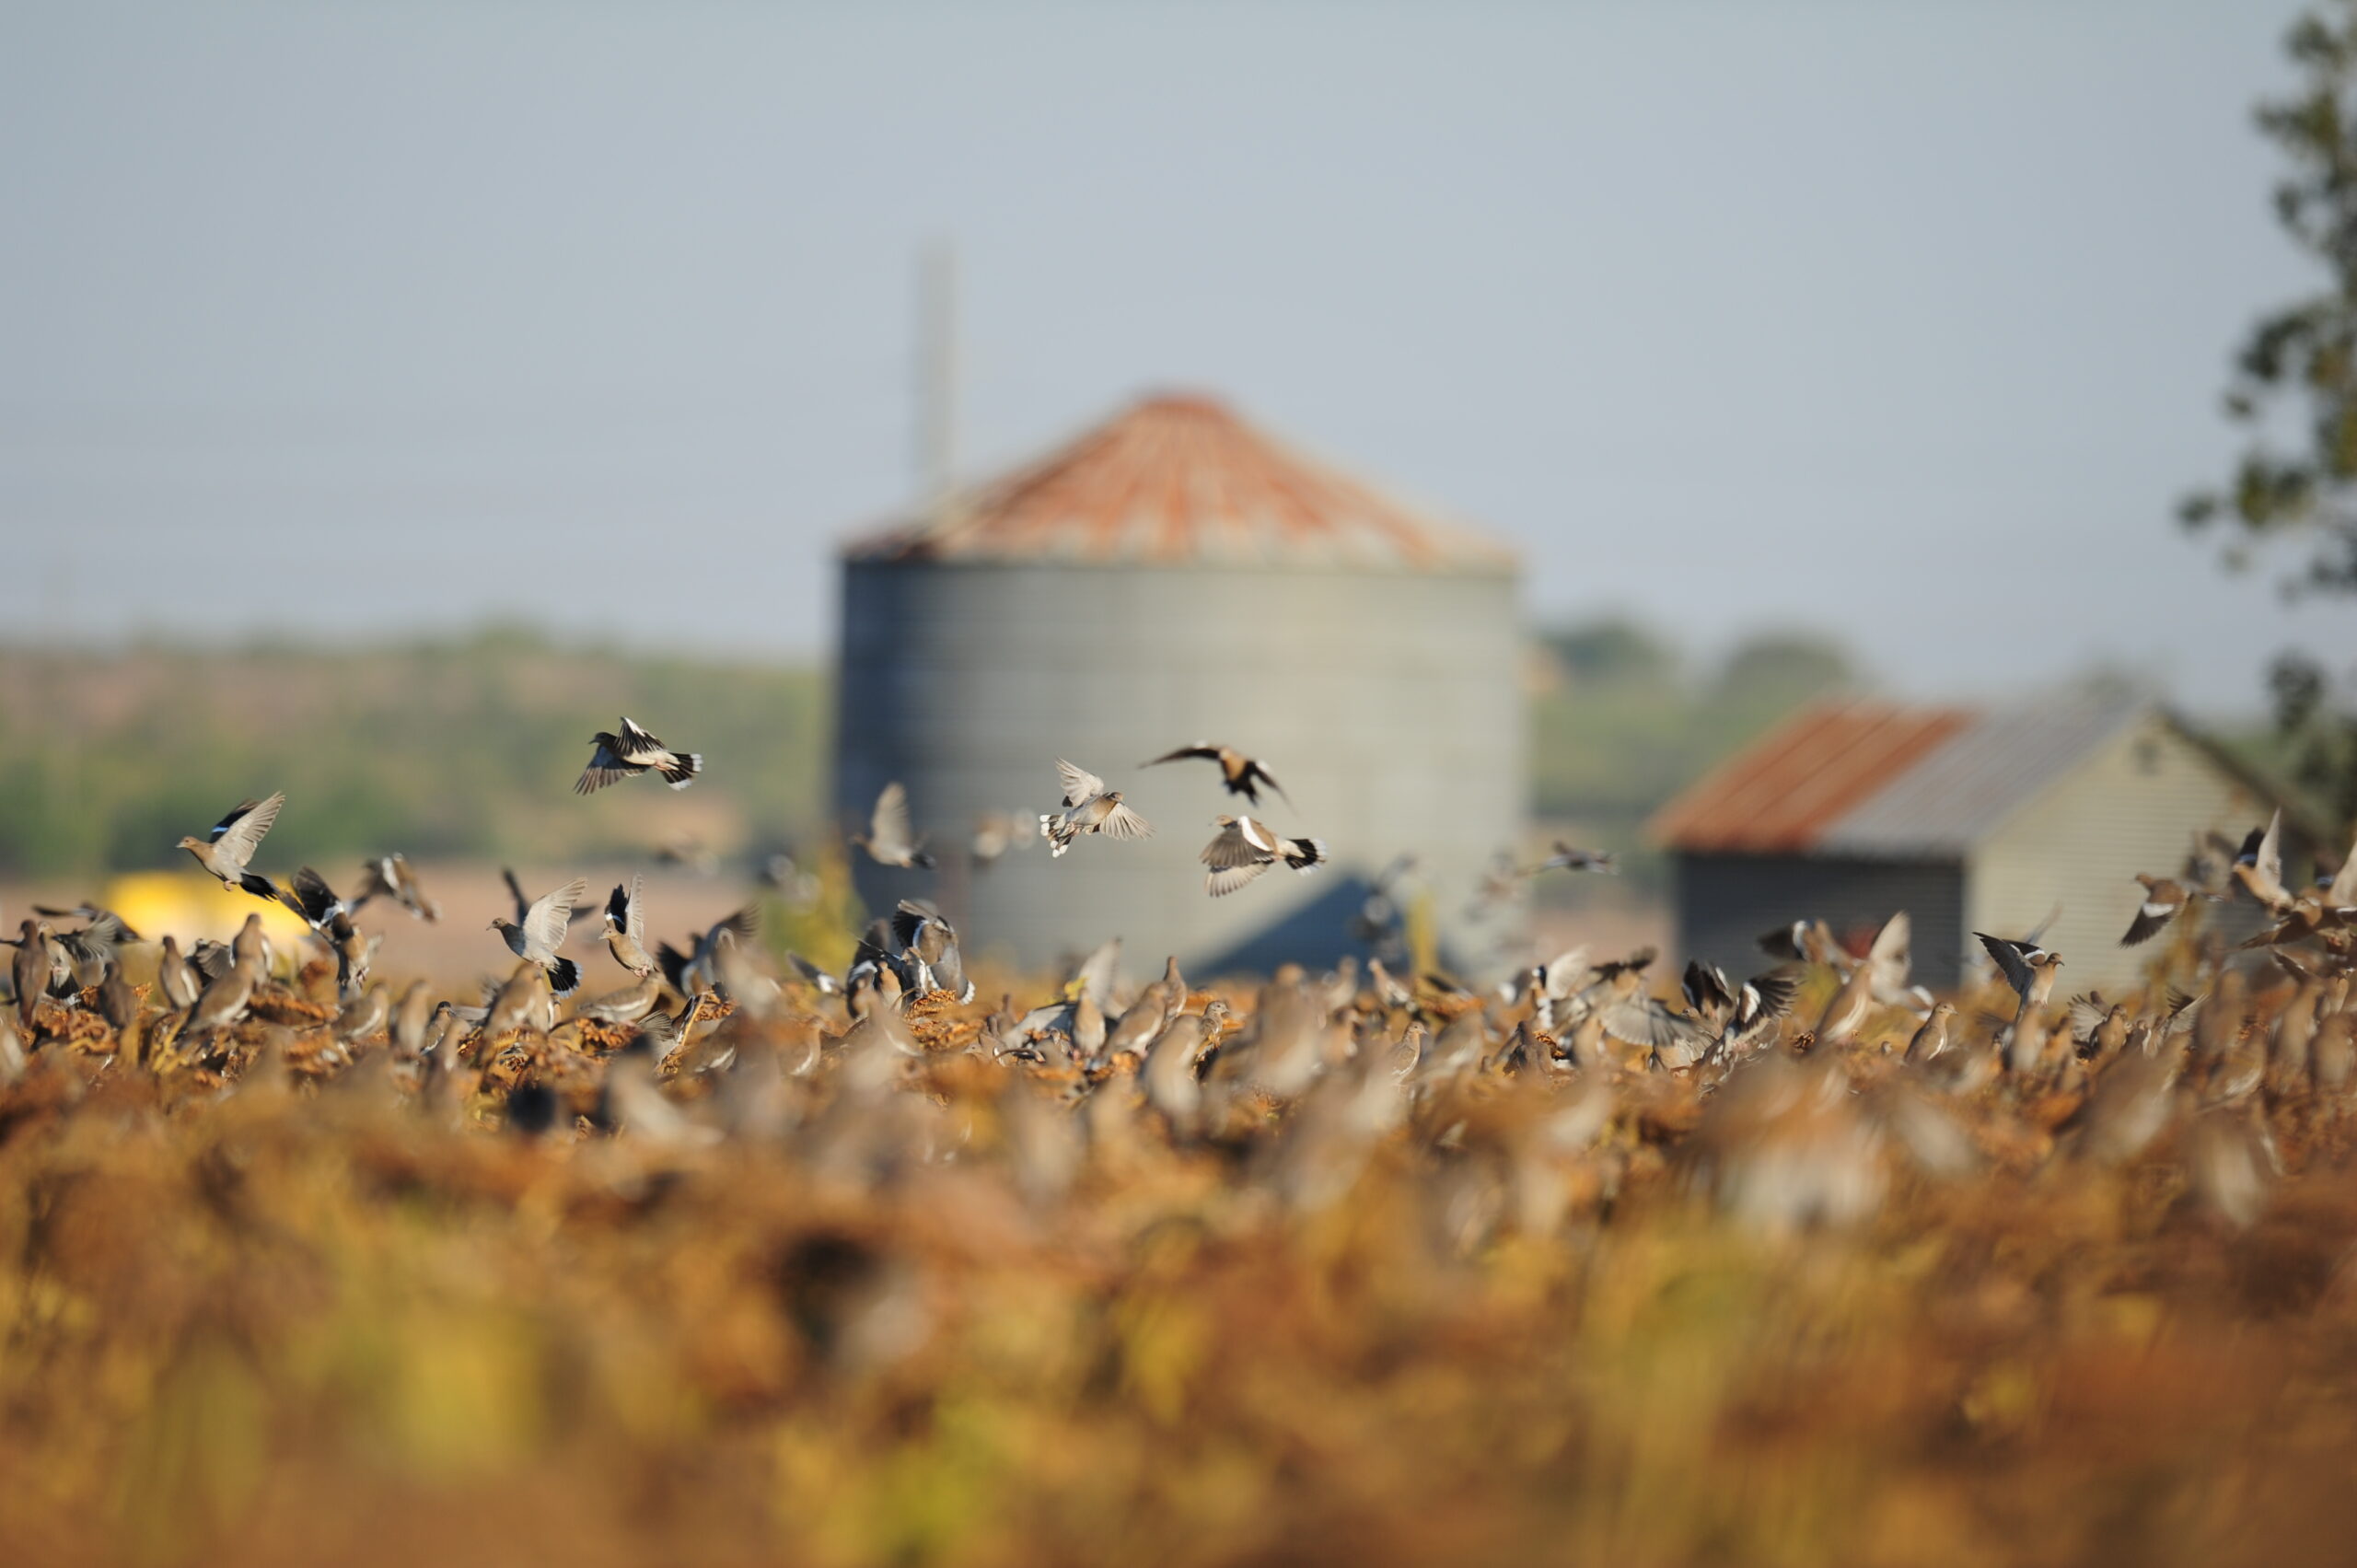 Finding doves is critical to a good hunt.